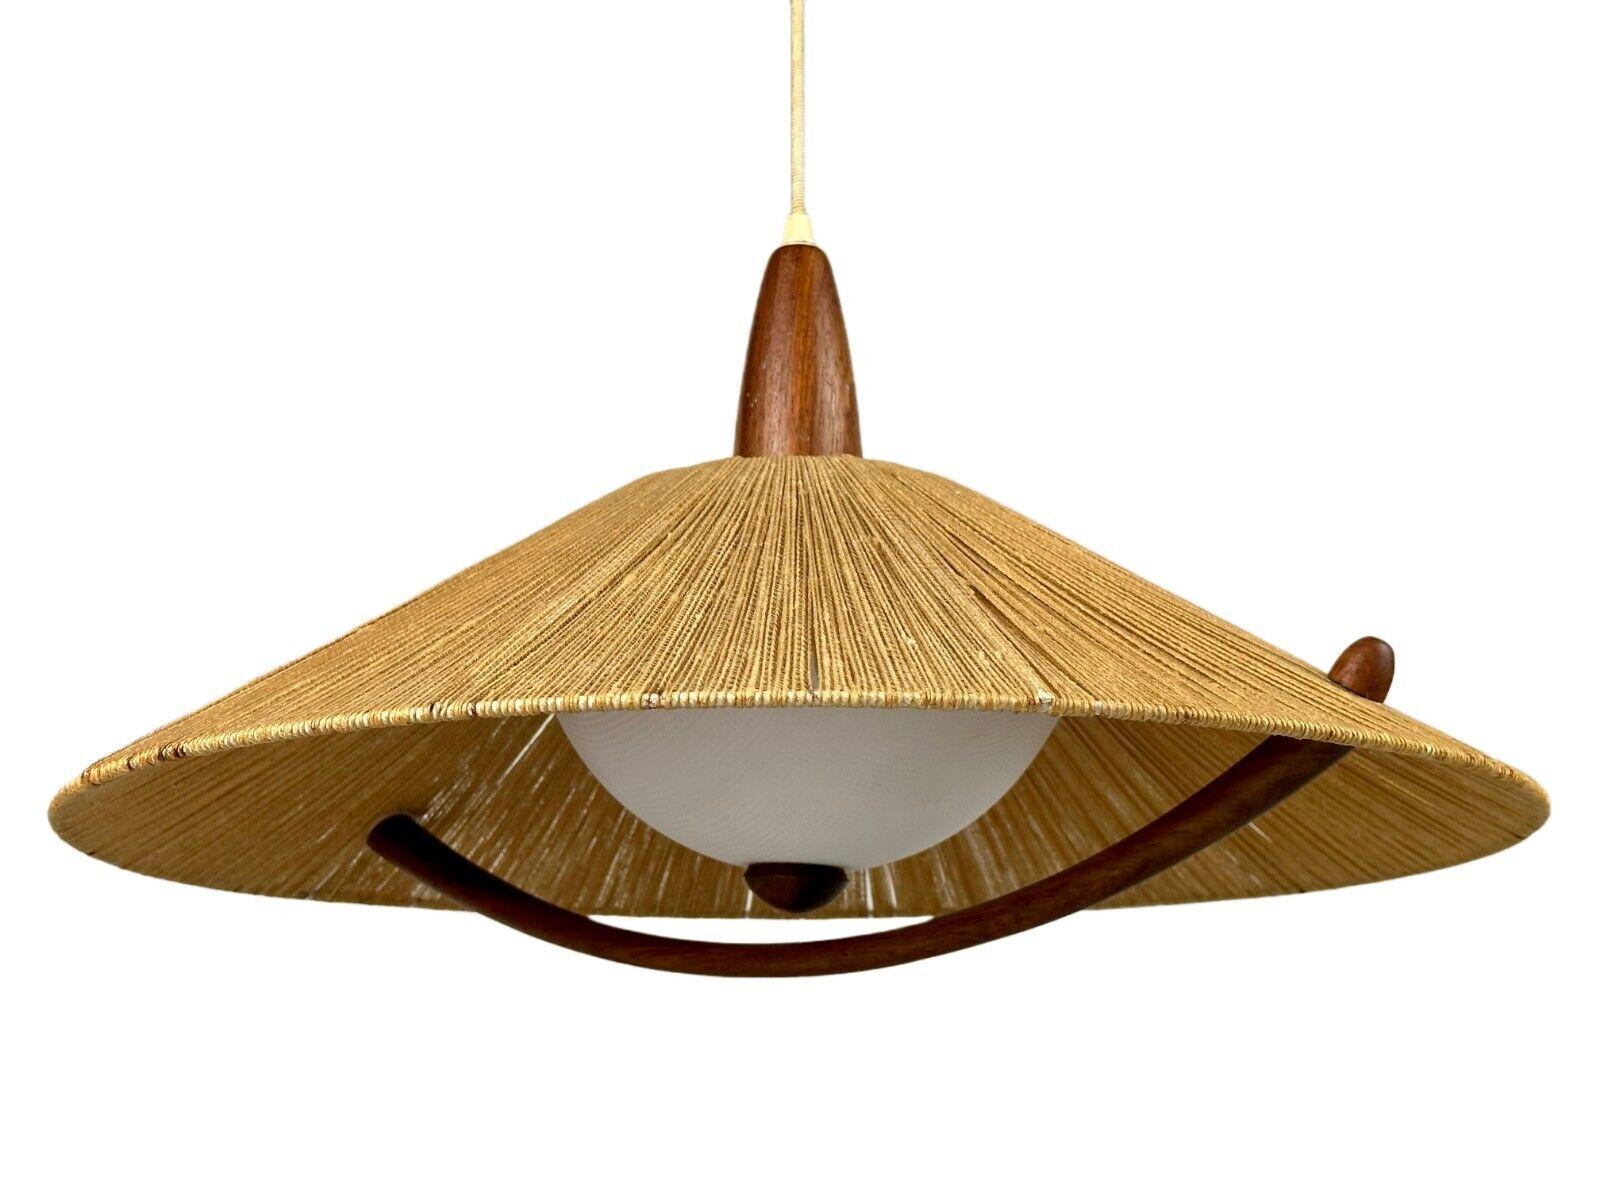 60s 70s lamp light ceiling lamp hanging lamp Temde Switzerland teak sisal

Object: ceiling lamp

Manufacturer: Temde

Condition: good

Age: around 1960-1970

Dimensions:

Diameter = 55.5cm
Height = 30cm

Other notes:

E27 socket

The pictures serve